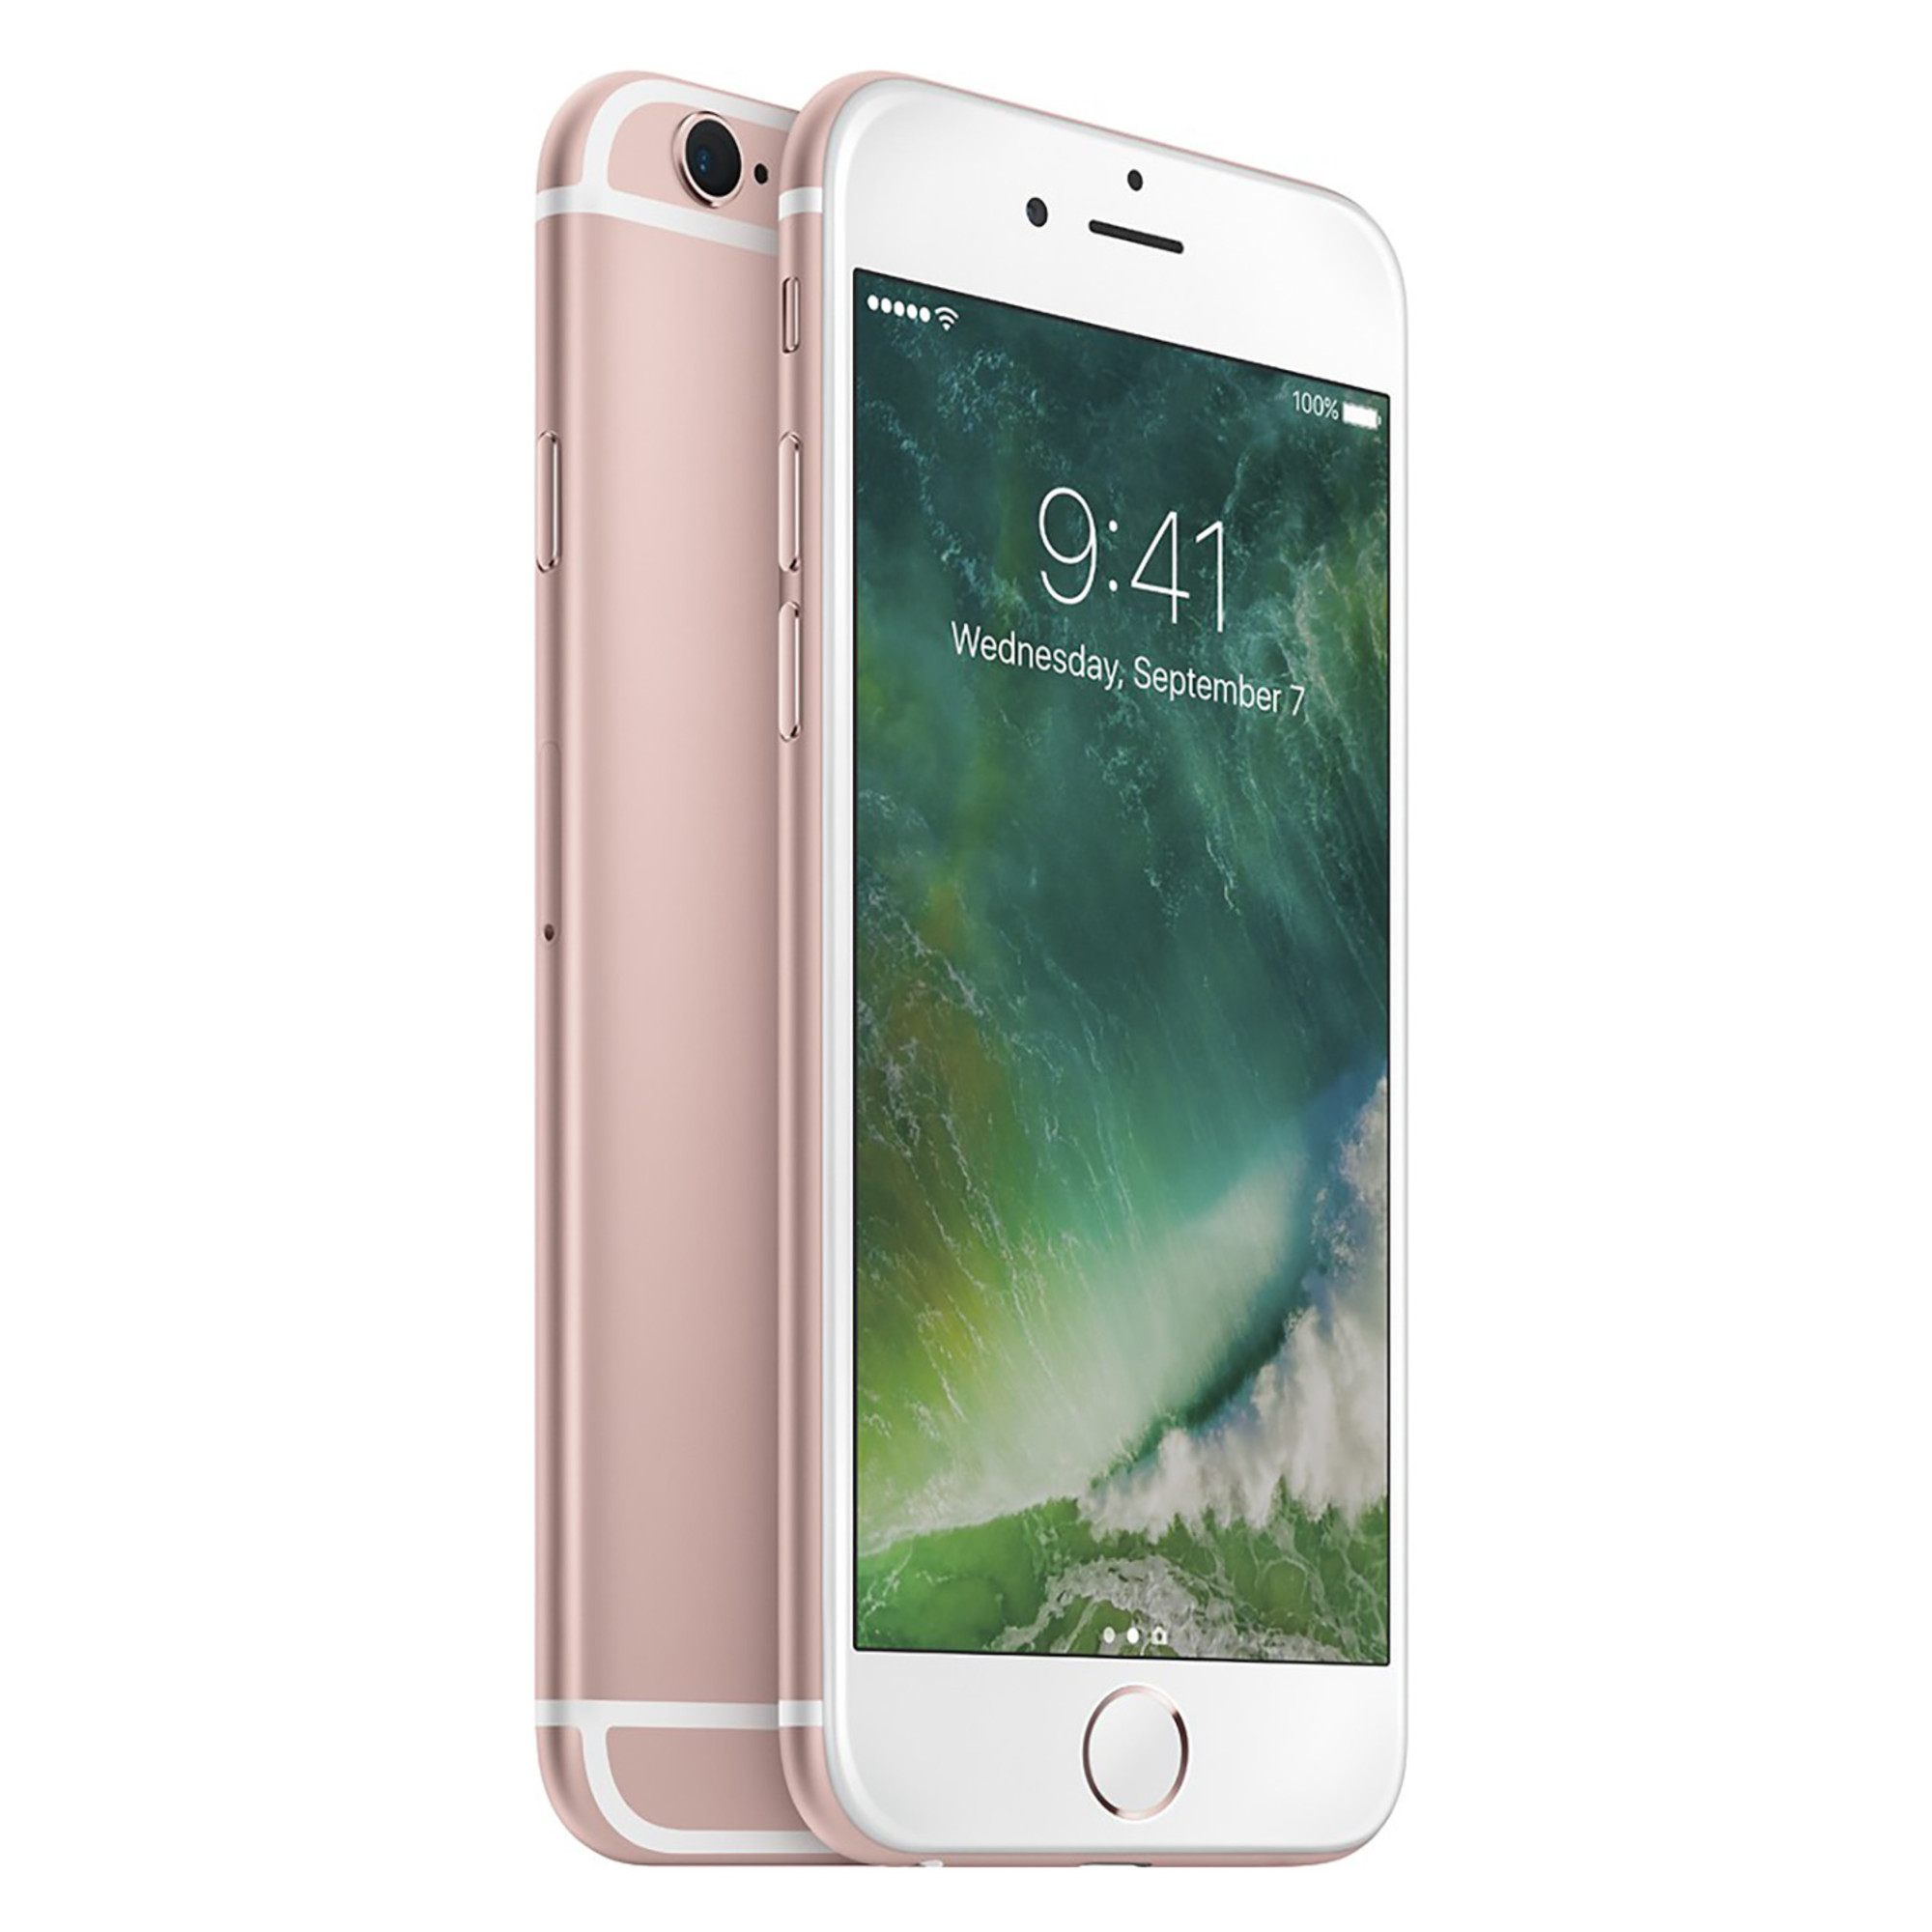 Apple iPhone 6s 64GB GSM Phone - Rose Gold (Used) + WeCare Alcohol Wipes Pack (50 Wipes) - image 1 of 6